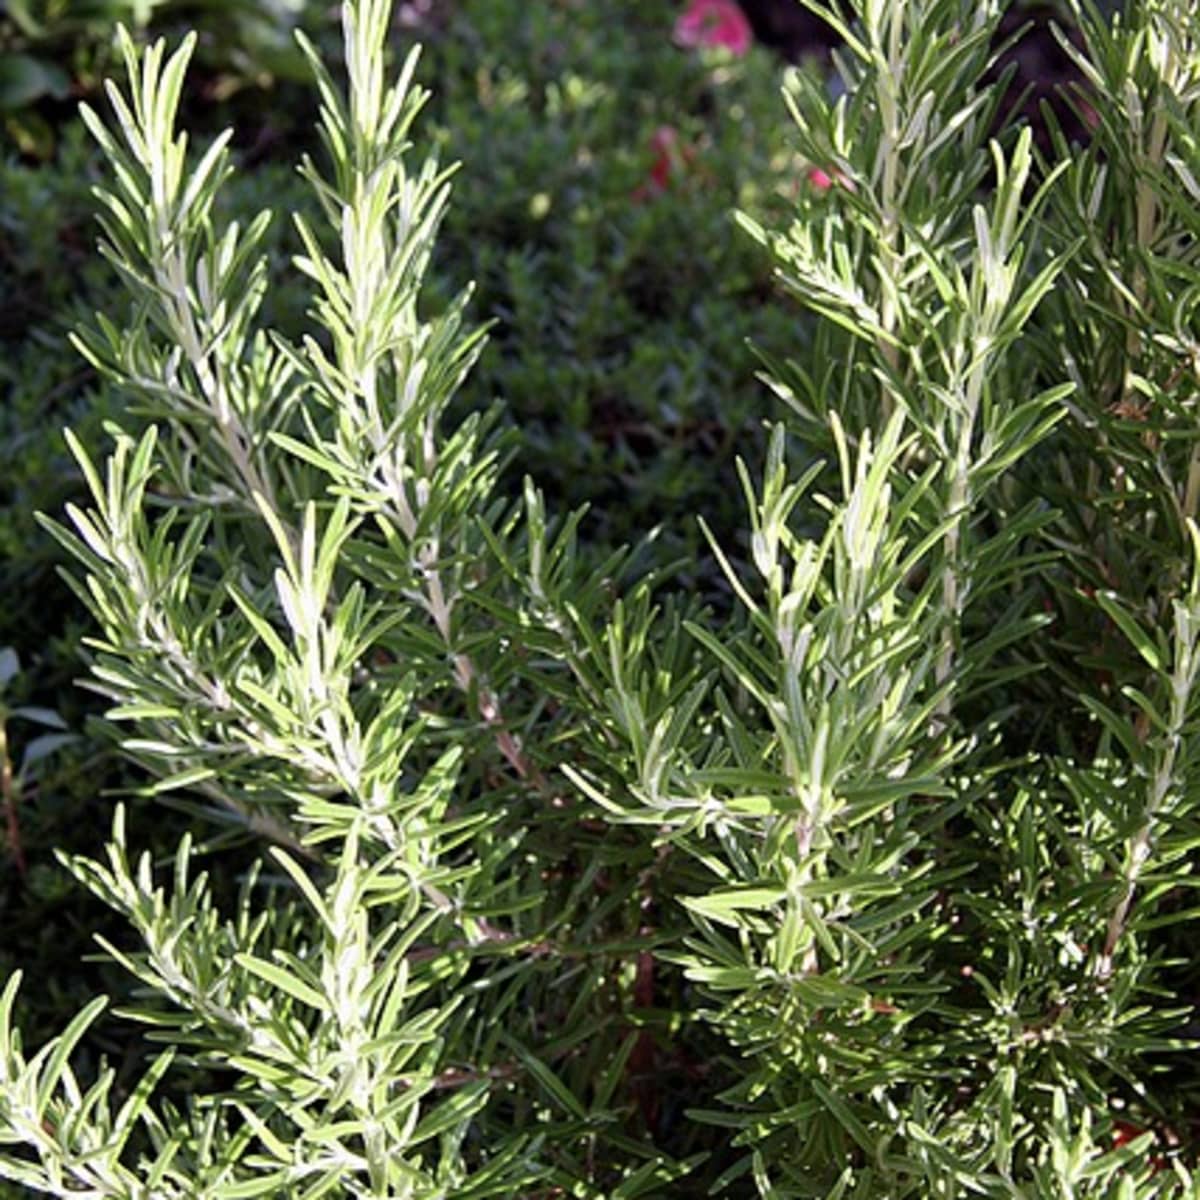 Rosemary in the Life of Jesus, Mary and Joseph